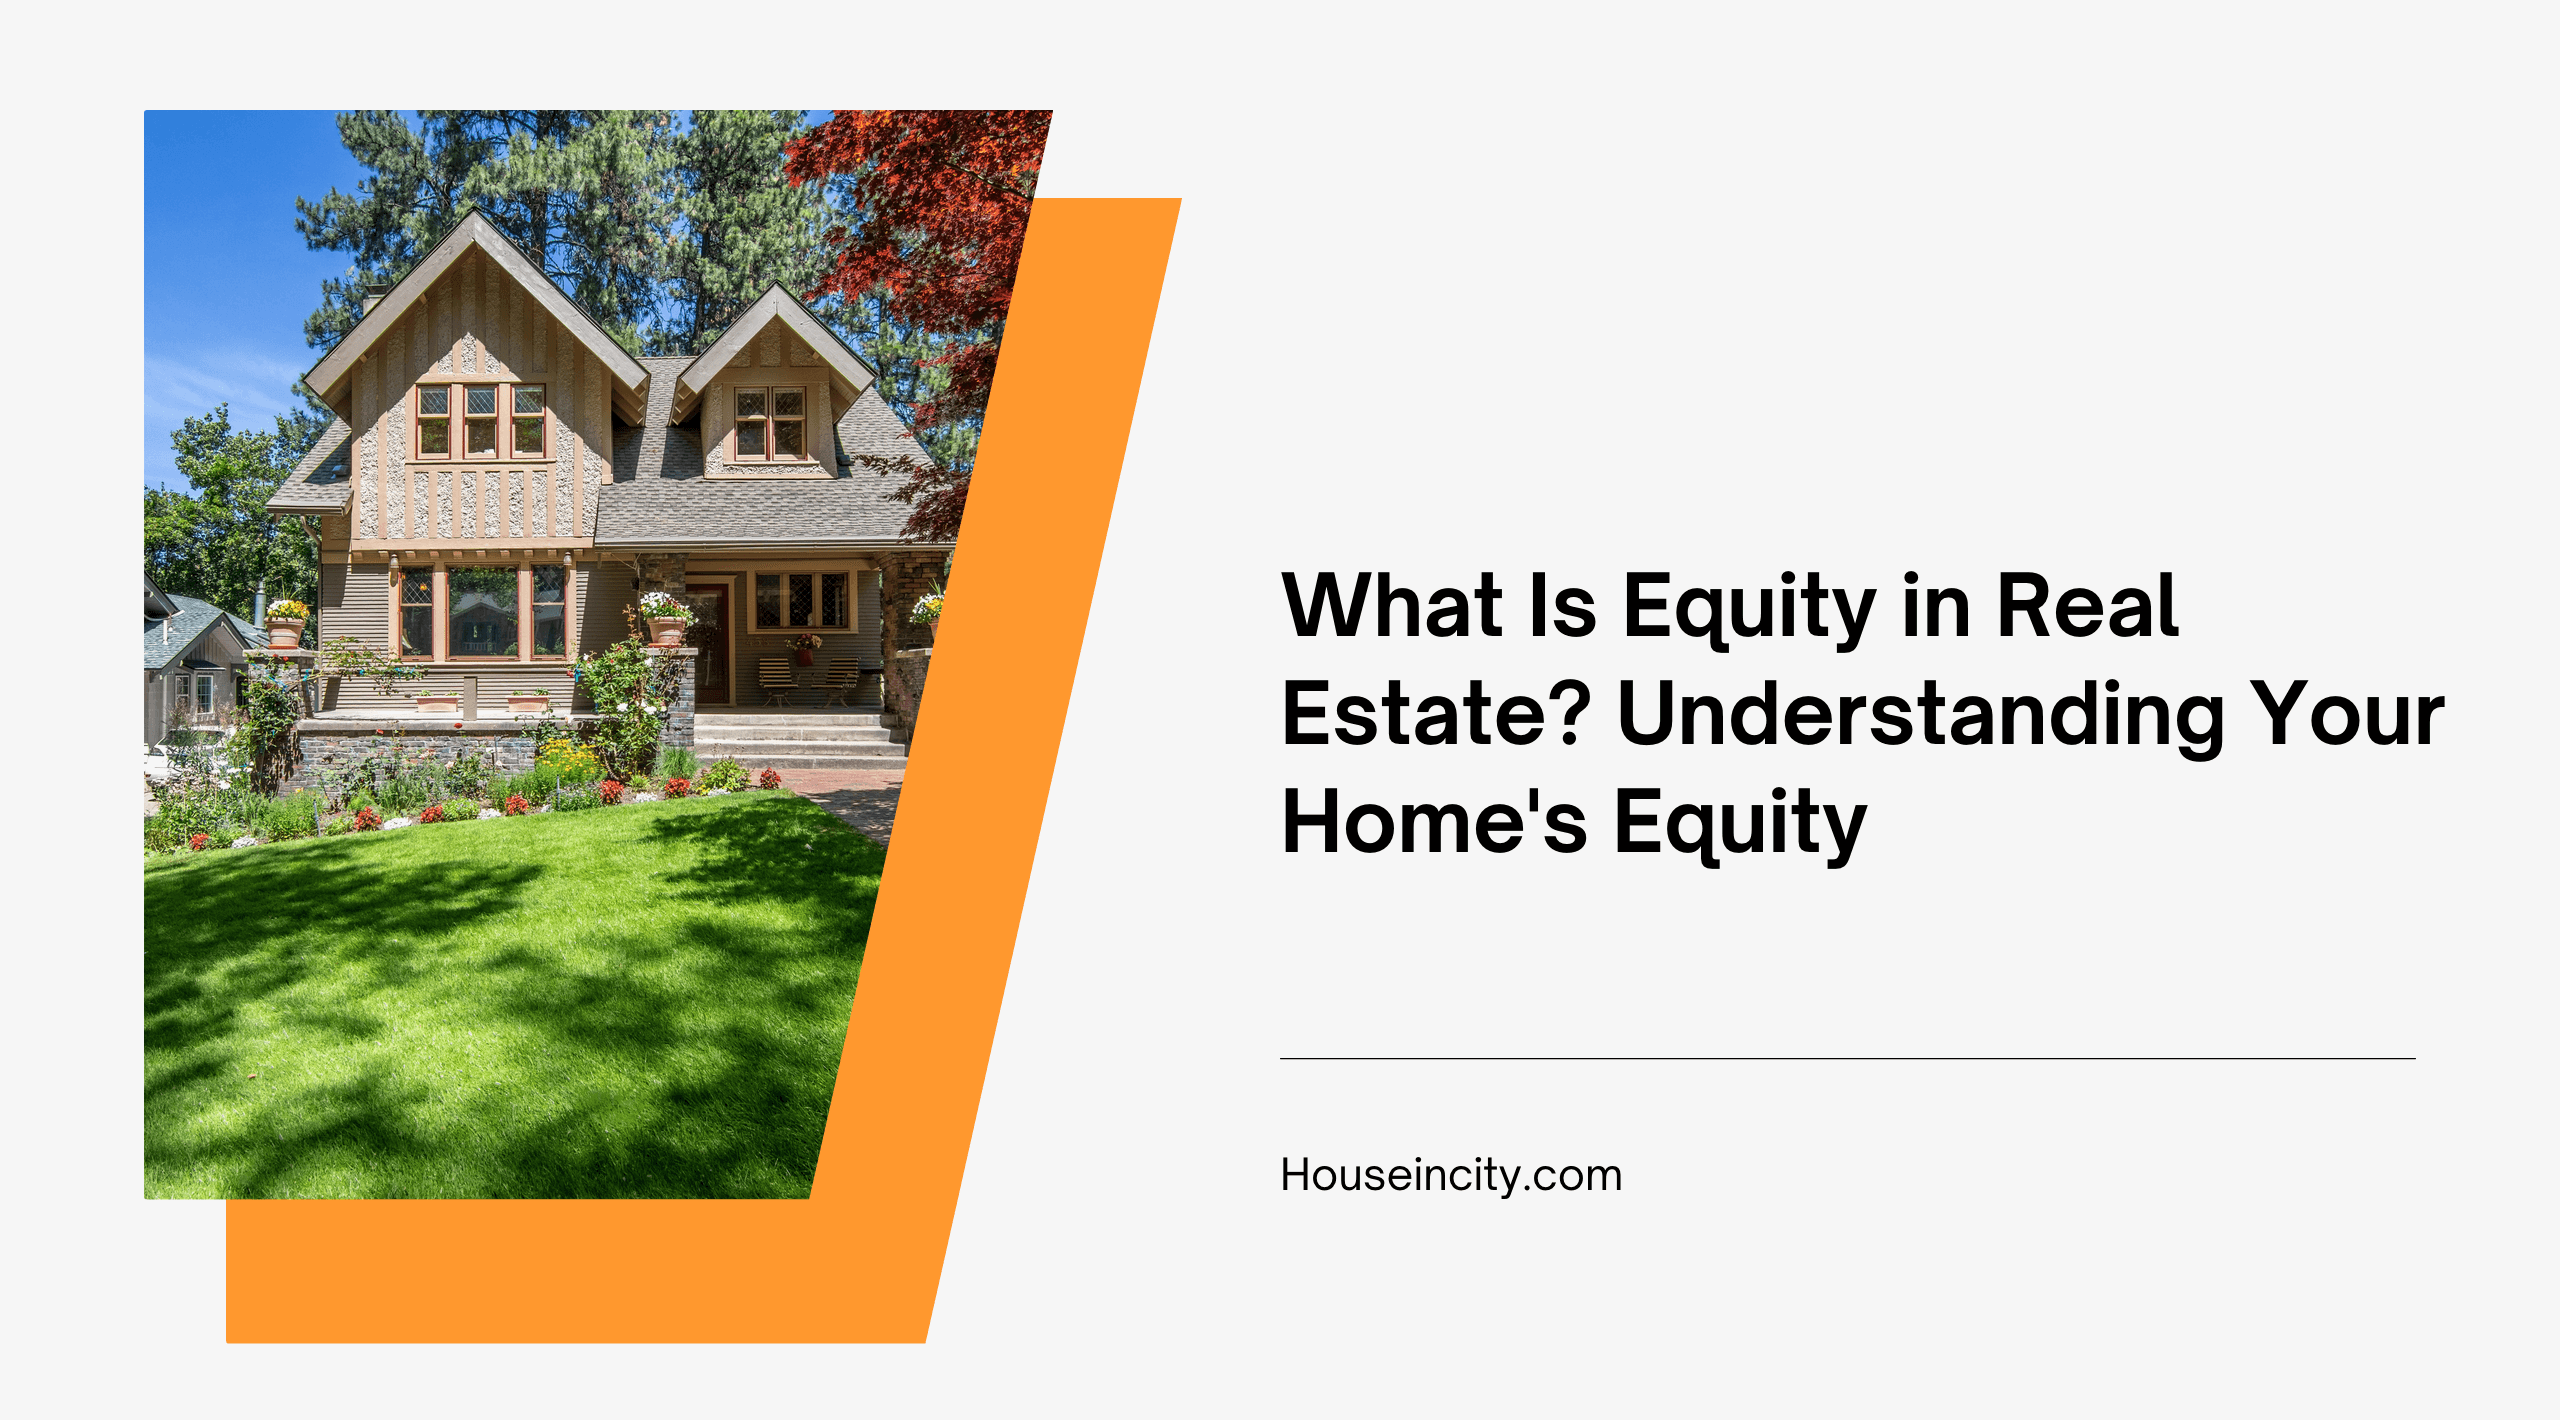 What Is Equity in Real Estate? Understanding Your Home's Equity